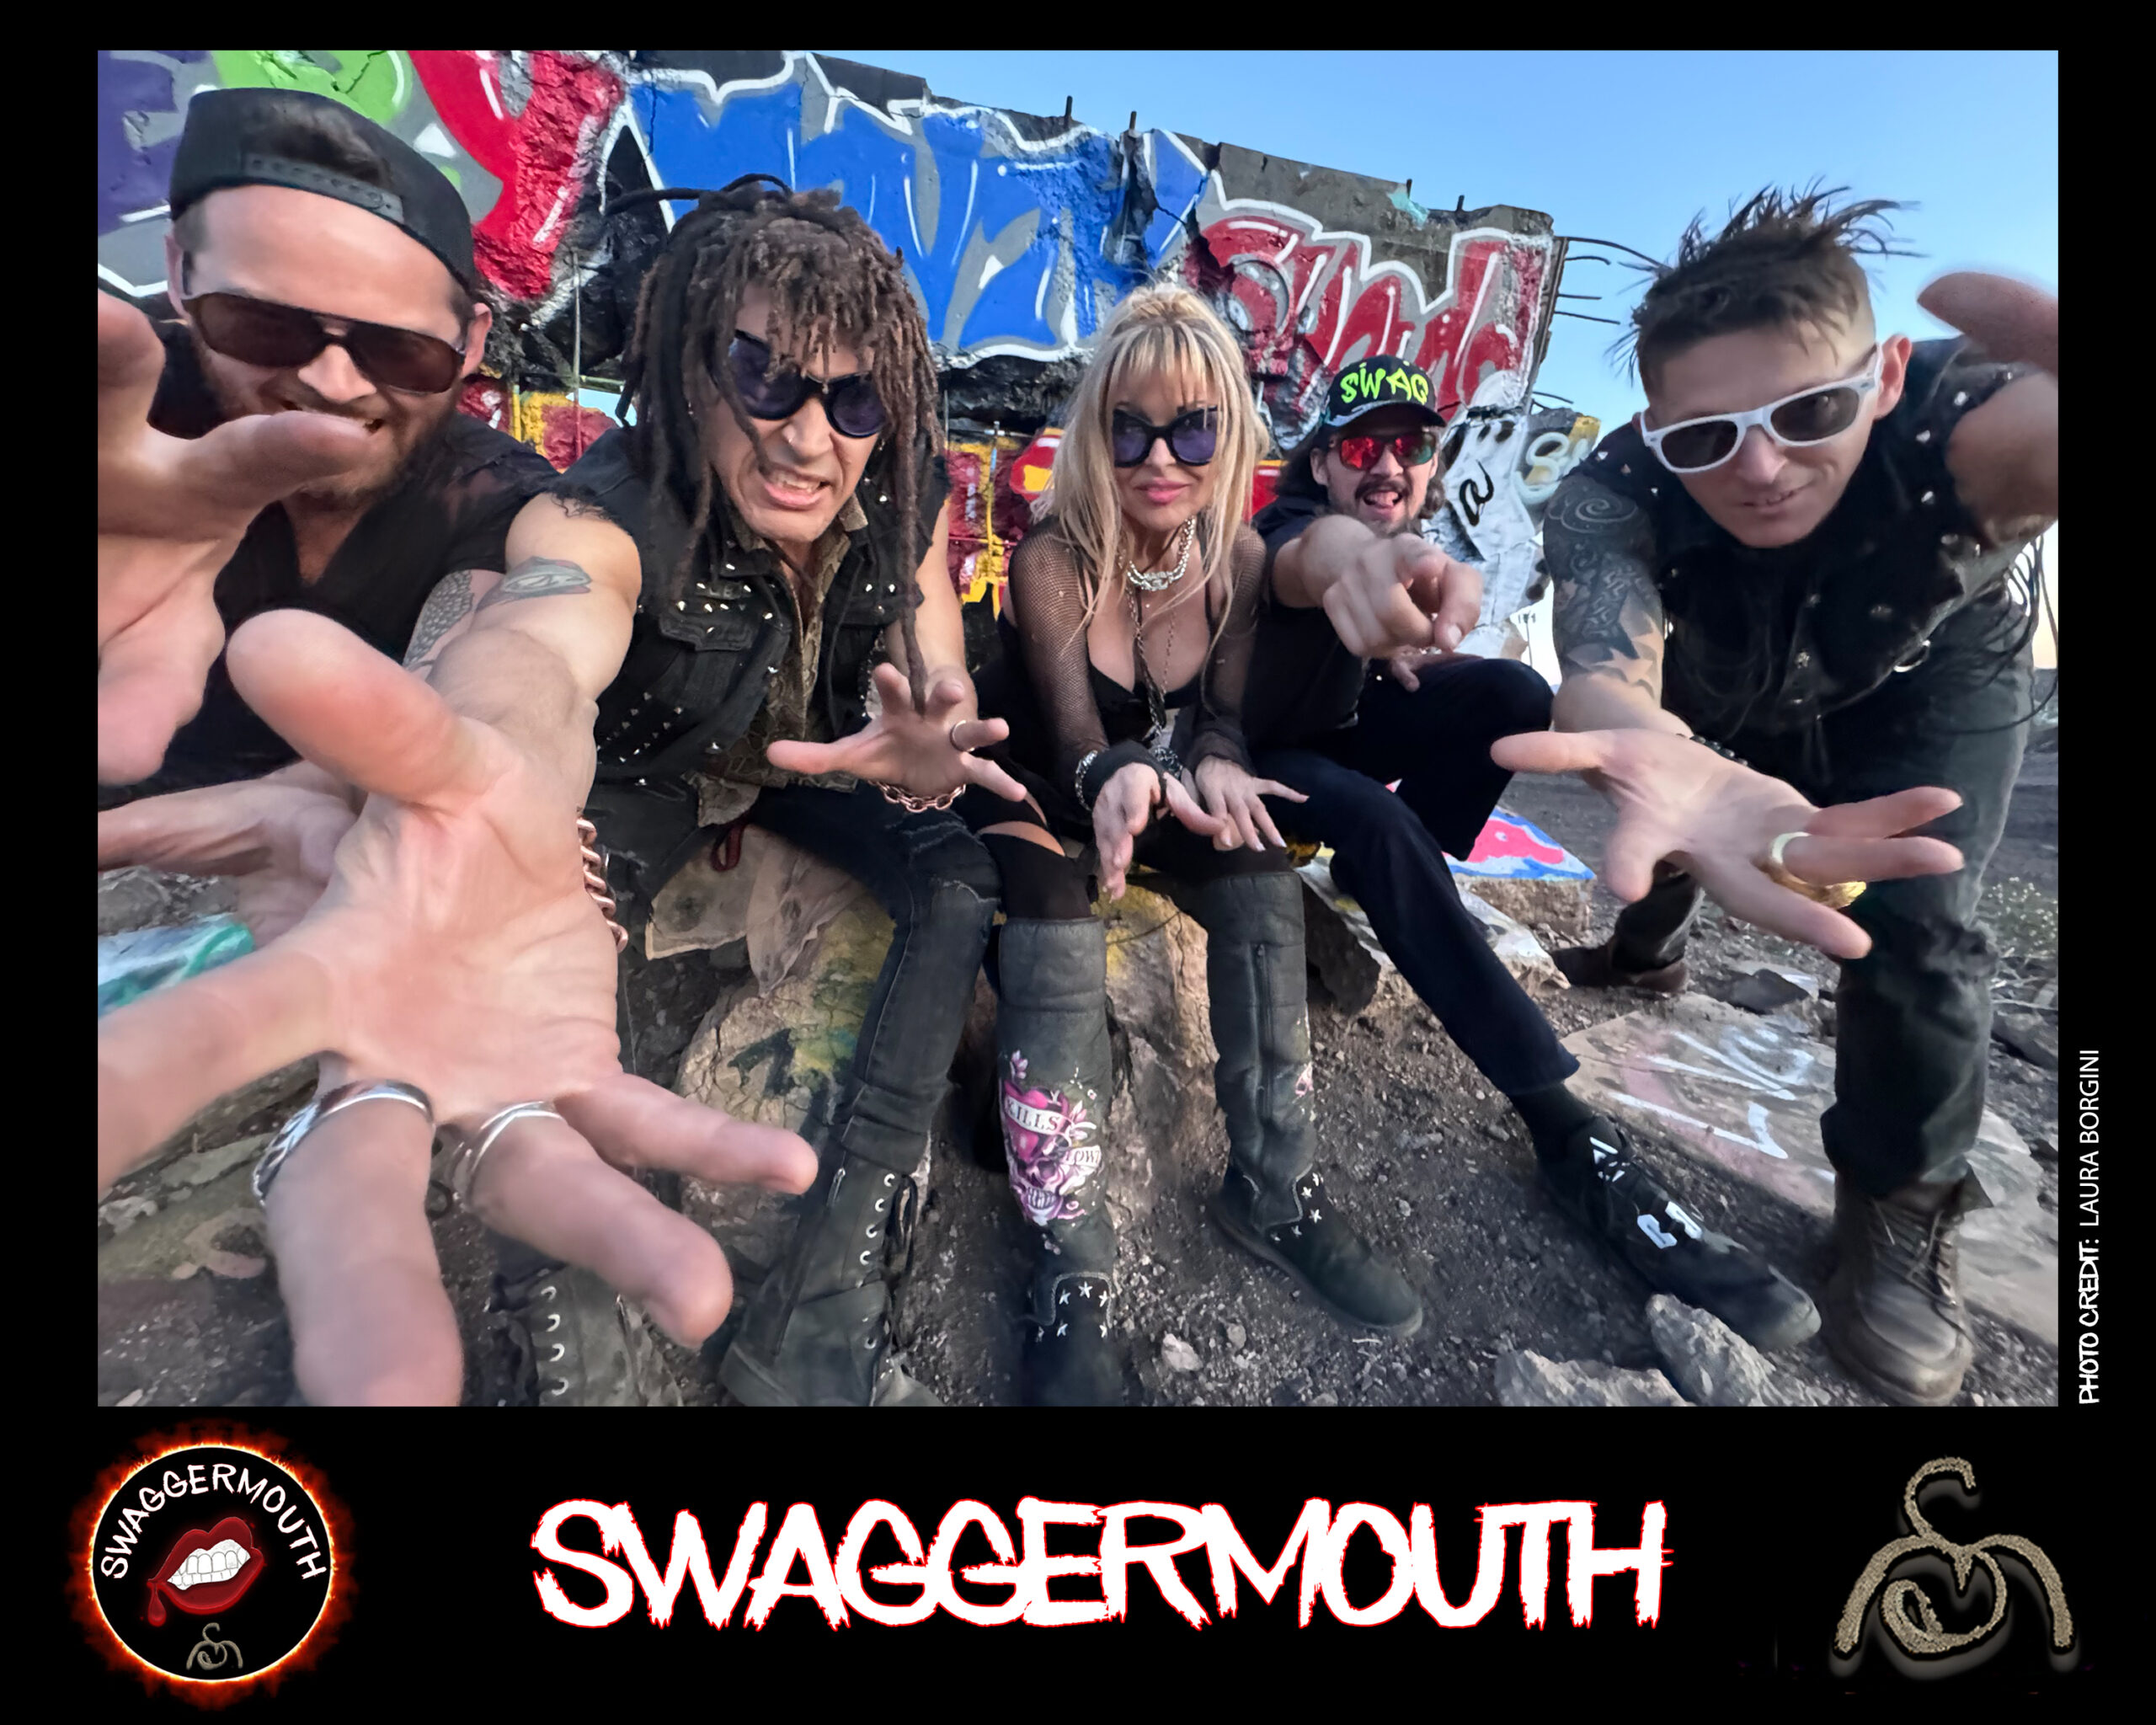 SWAGGERMOUTH Reveals New Track “Let It Roll”